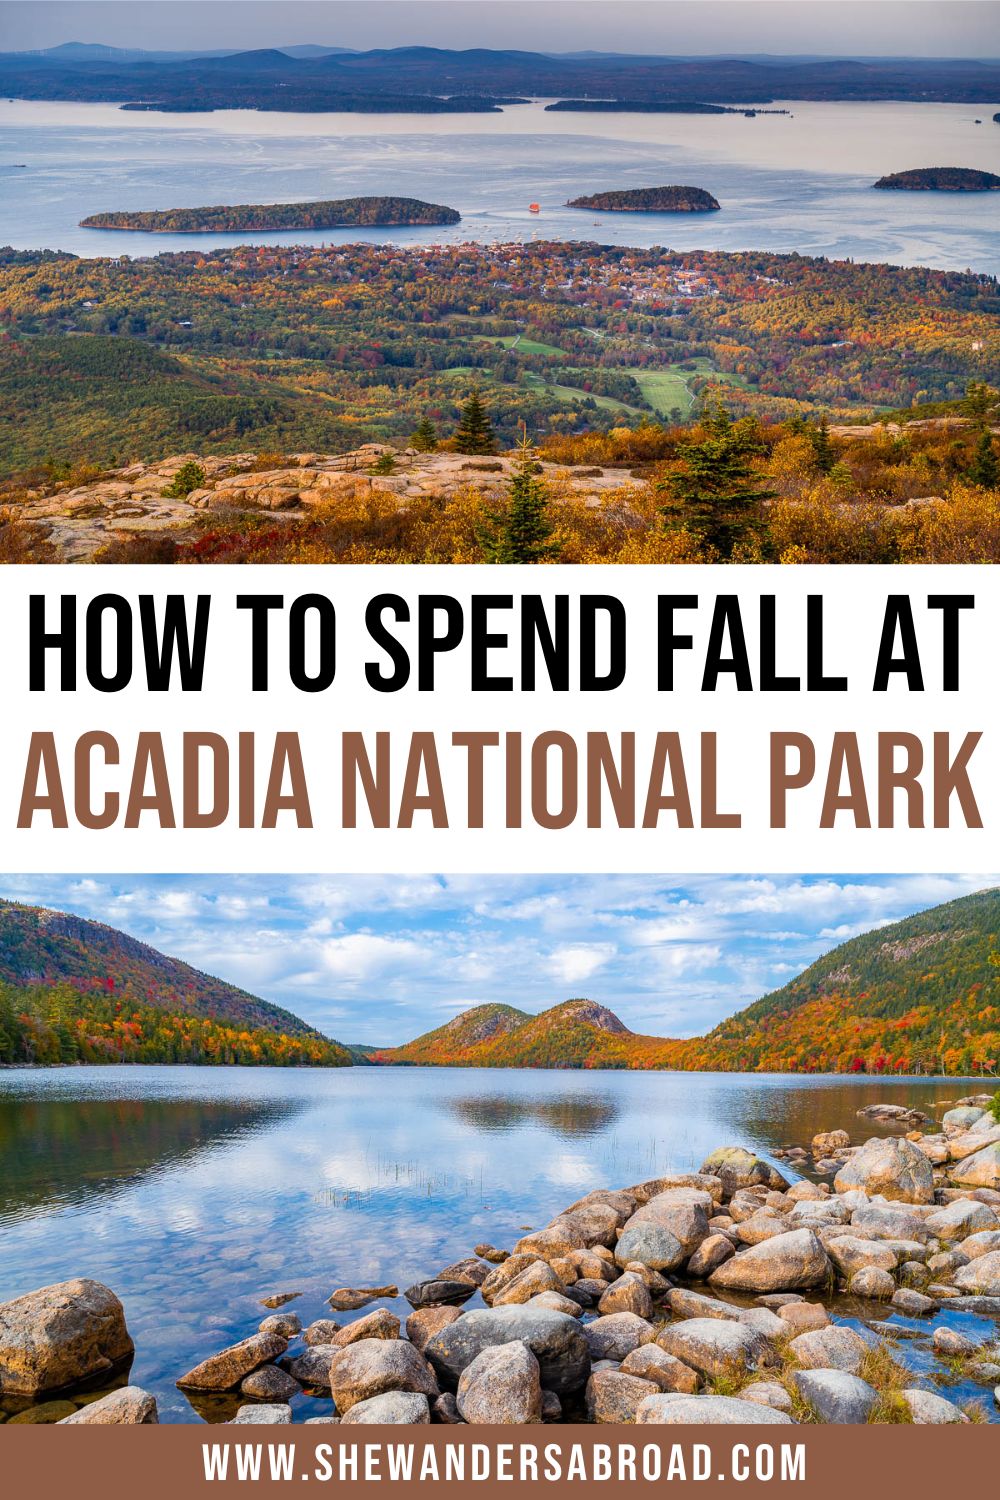 Acadia National Park in the Fall: Practical Info & Tips for Visiting